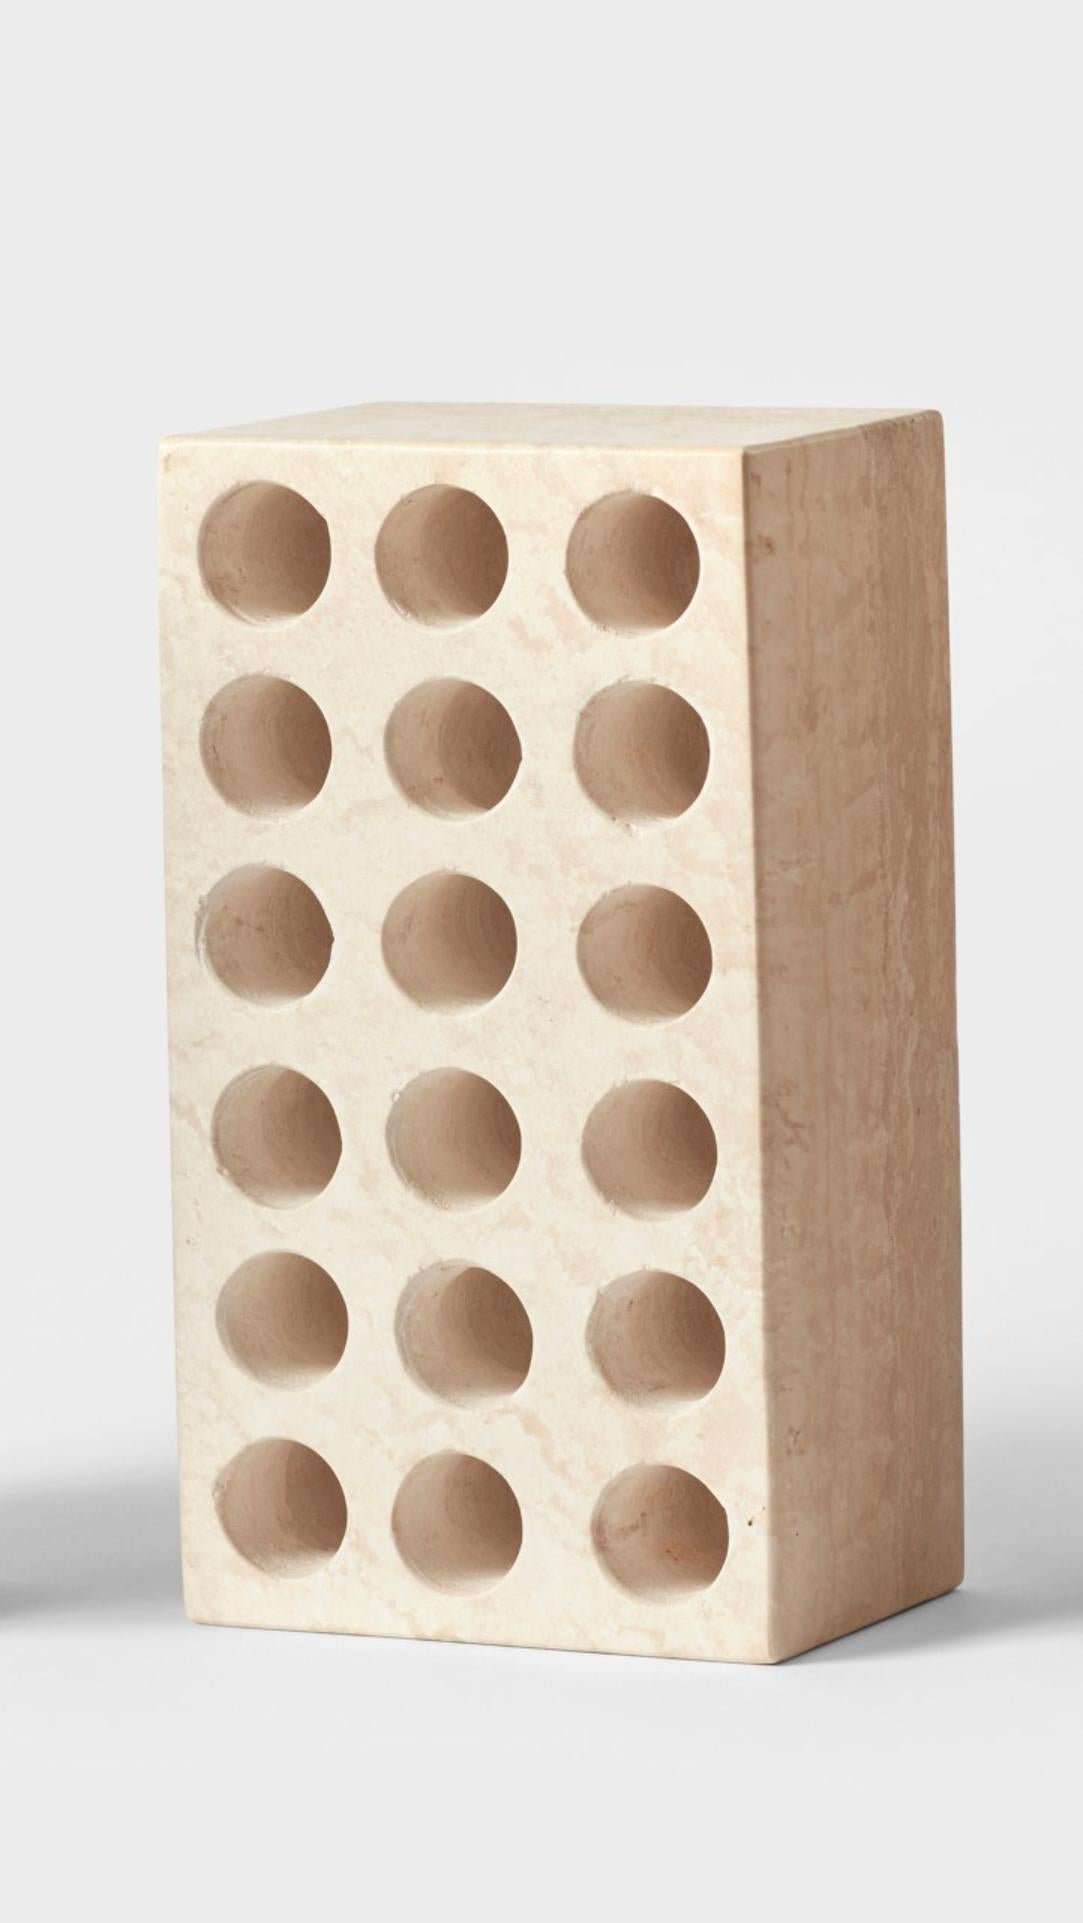 Brick by Estudio Rafael Freyre
Dimensions: W 12.5 D 9 x H 23 cm 
Materials: Andes Stones
Also Available: Other finishes available.

The brick is a generic constructive element that constitutes part of the urban imaginary. In Peru, moreover, its